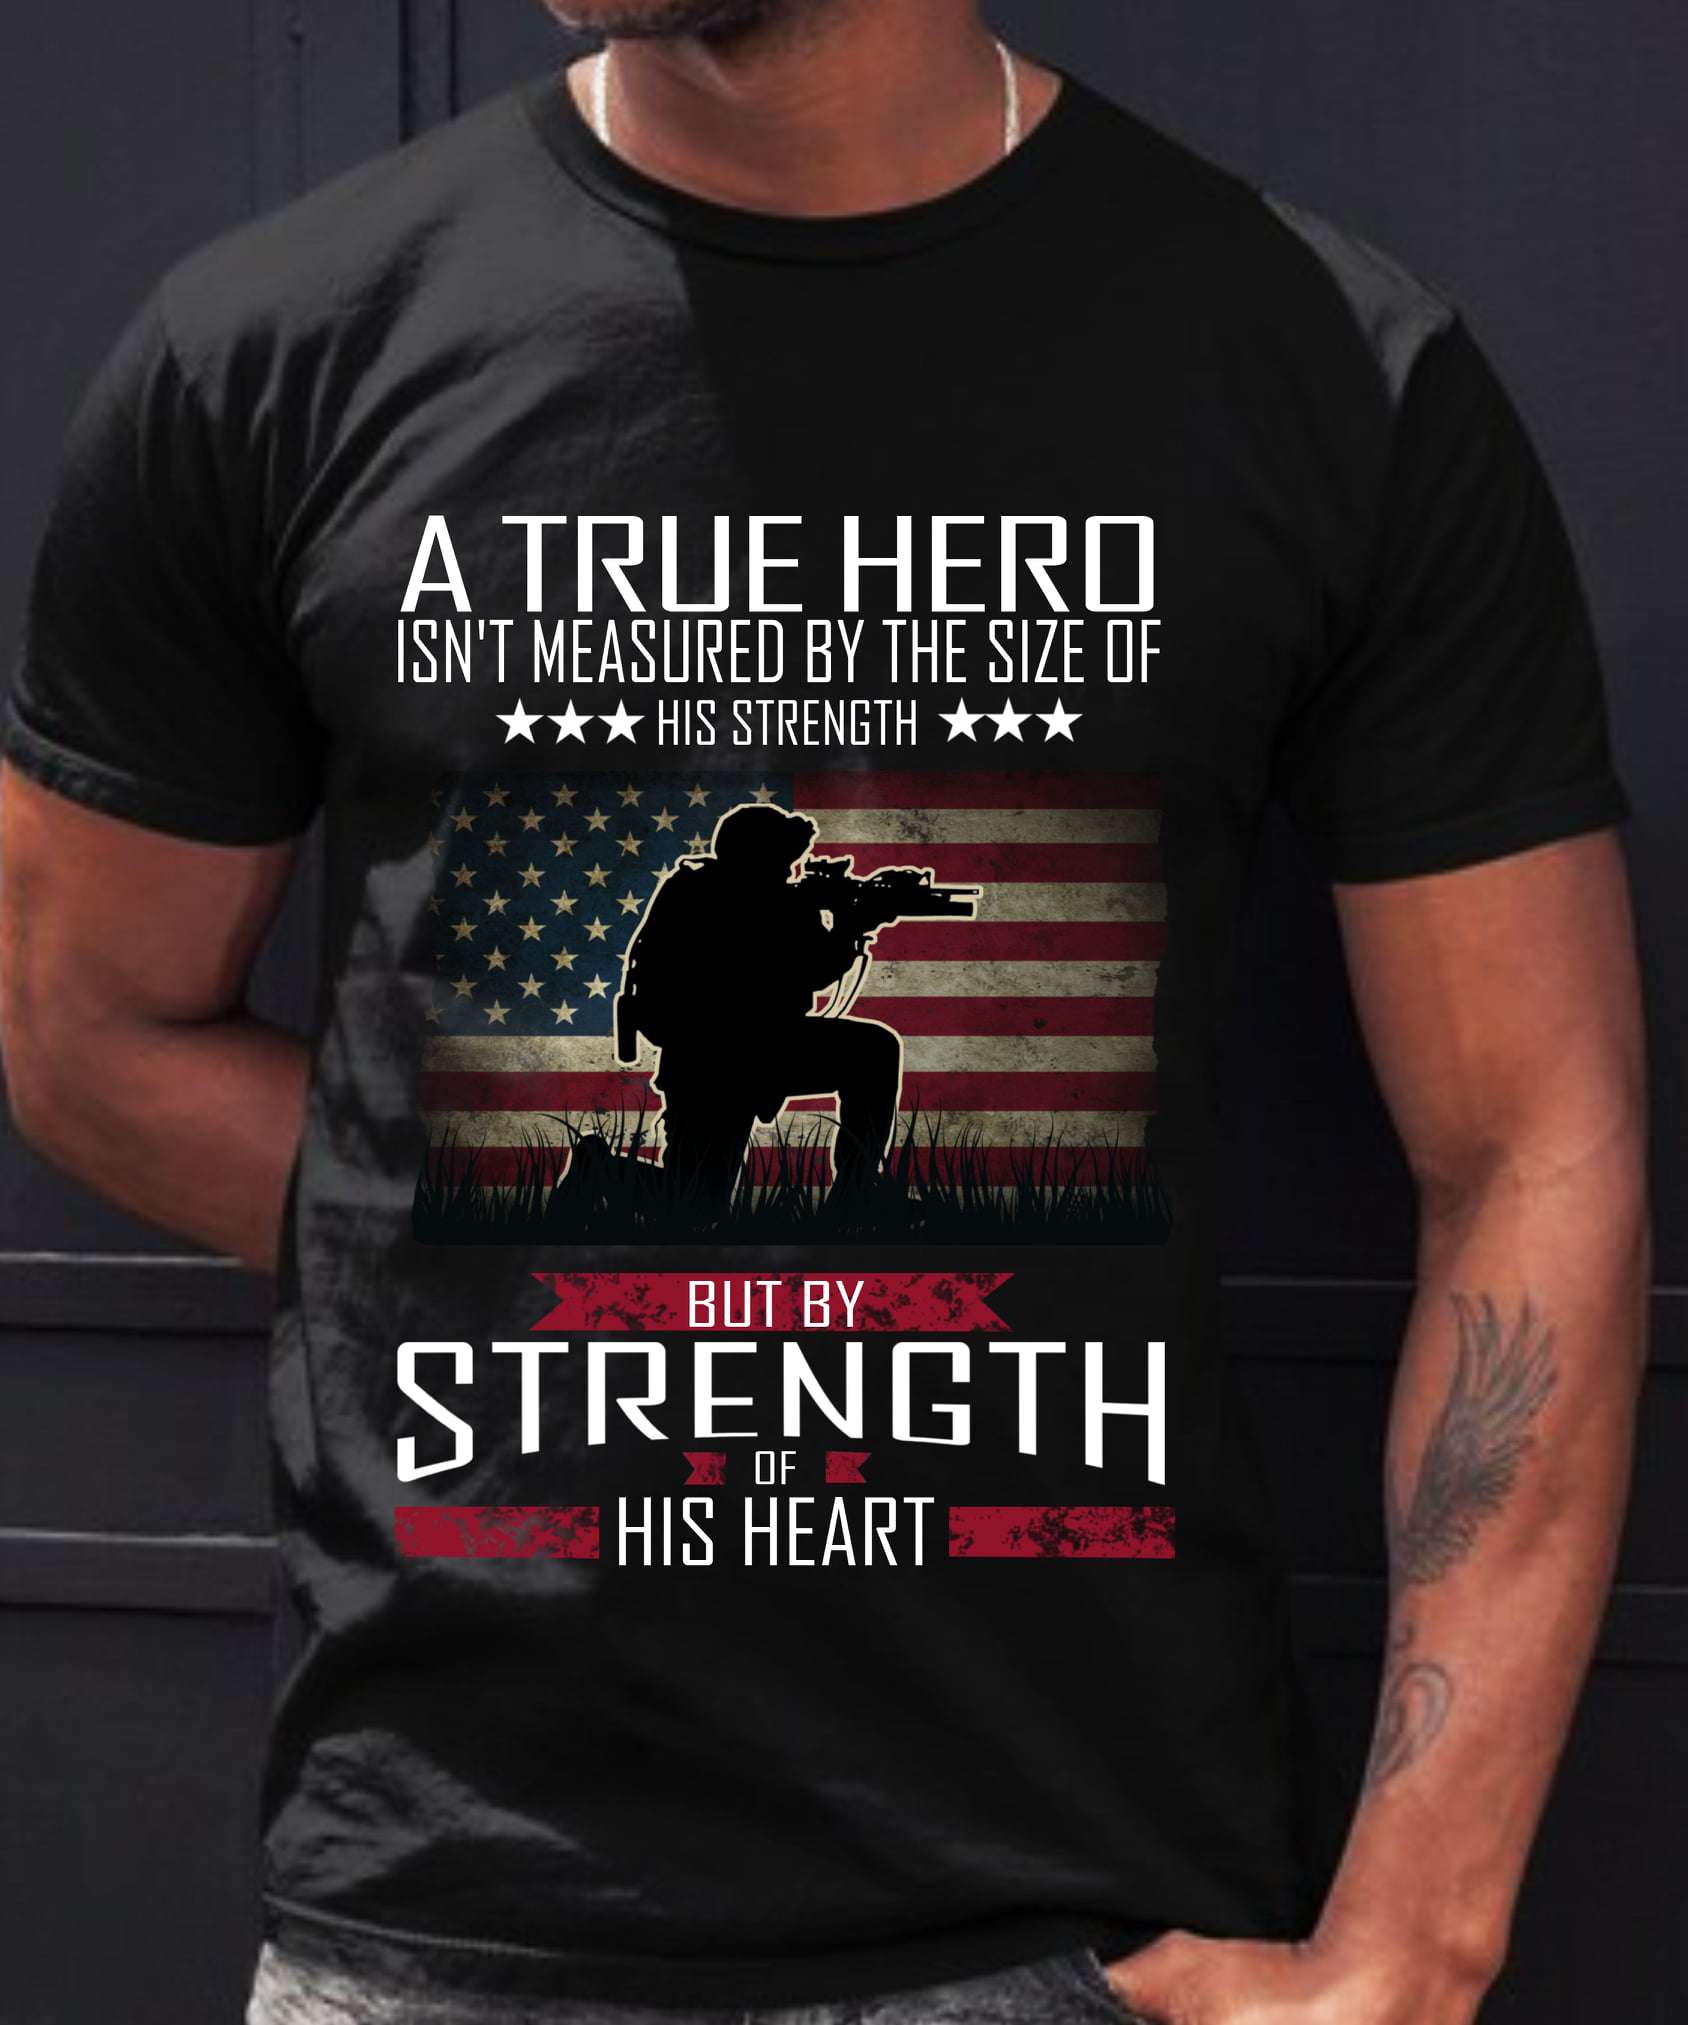 A true hero isn't measured by the size of his strength but by strength of his heart - American soldiers